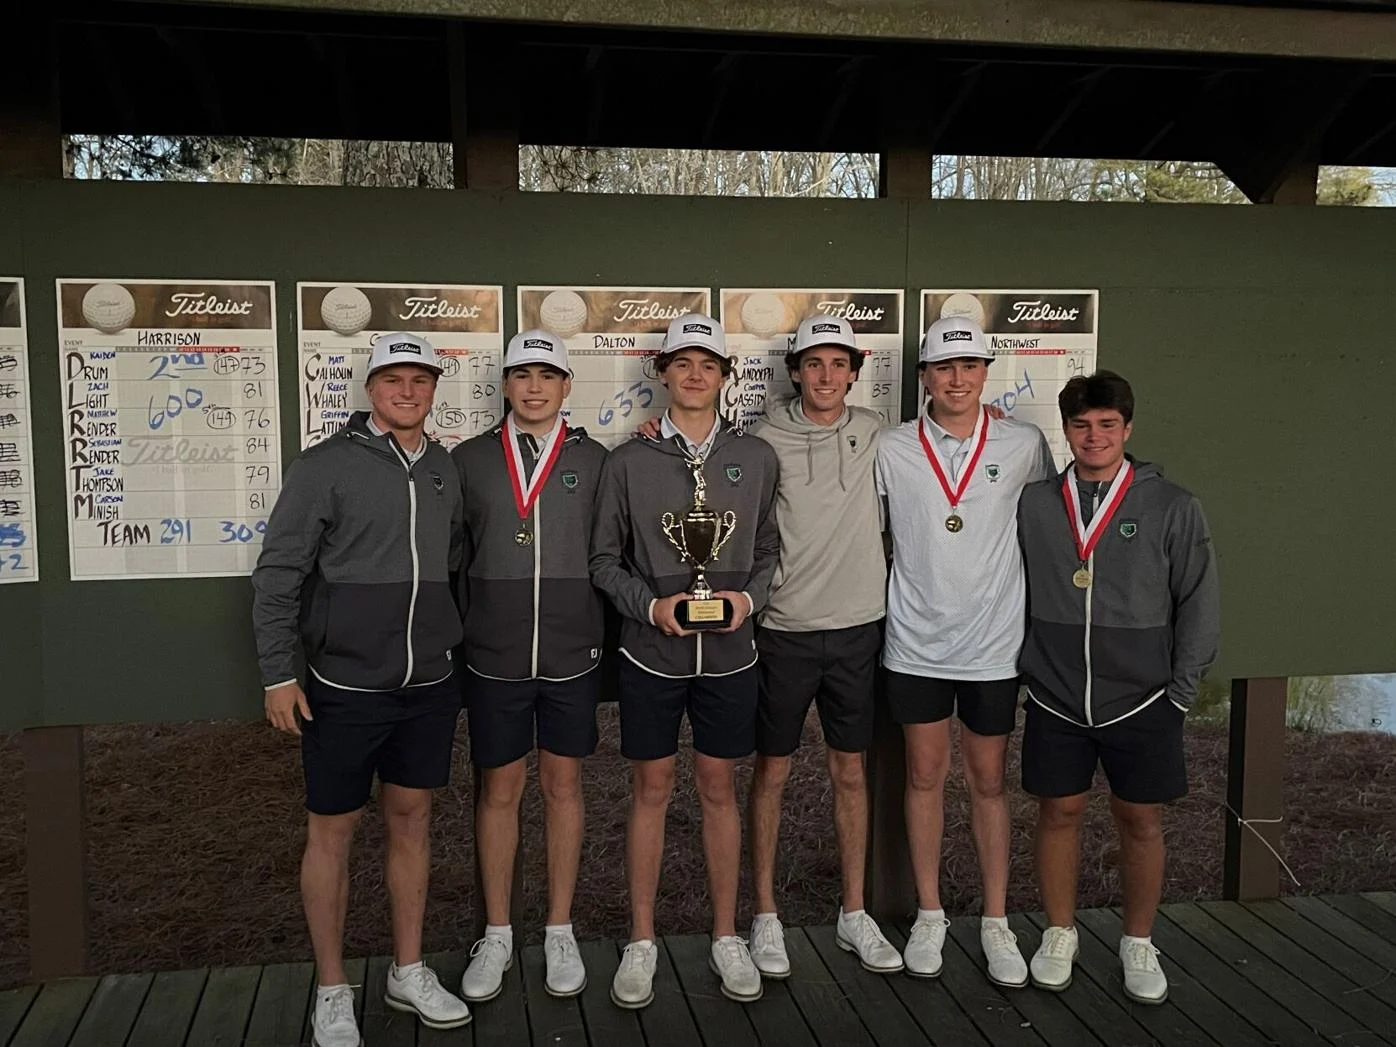 The boys' golf team from Creekview wins the North Georgia Invitational